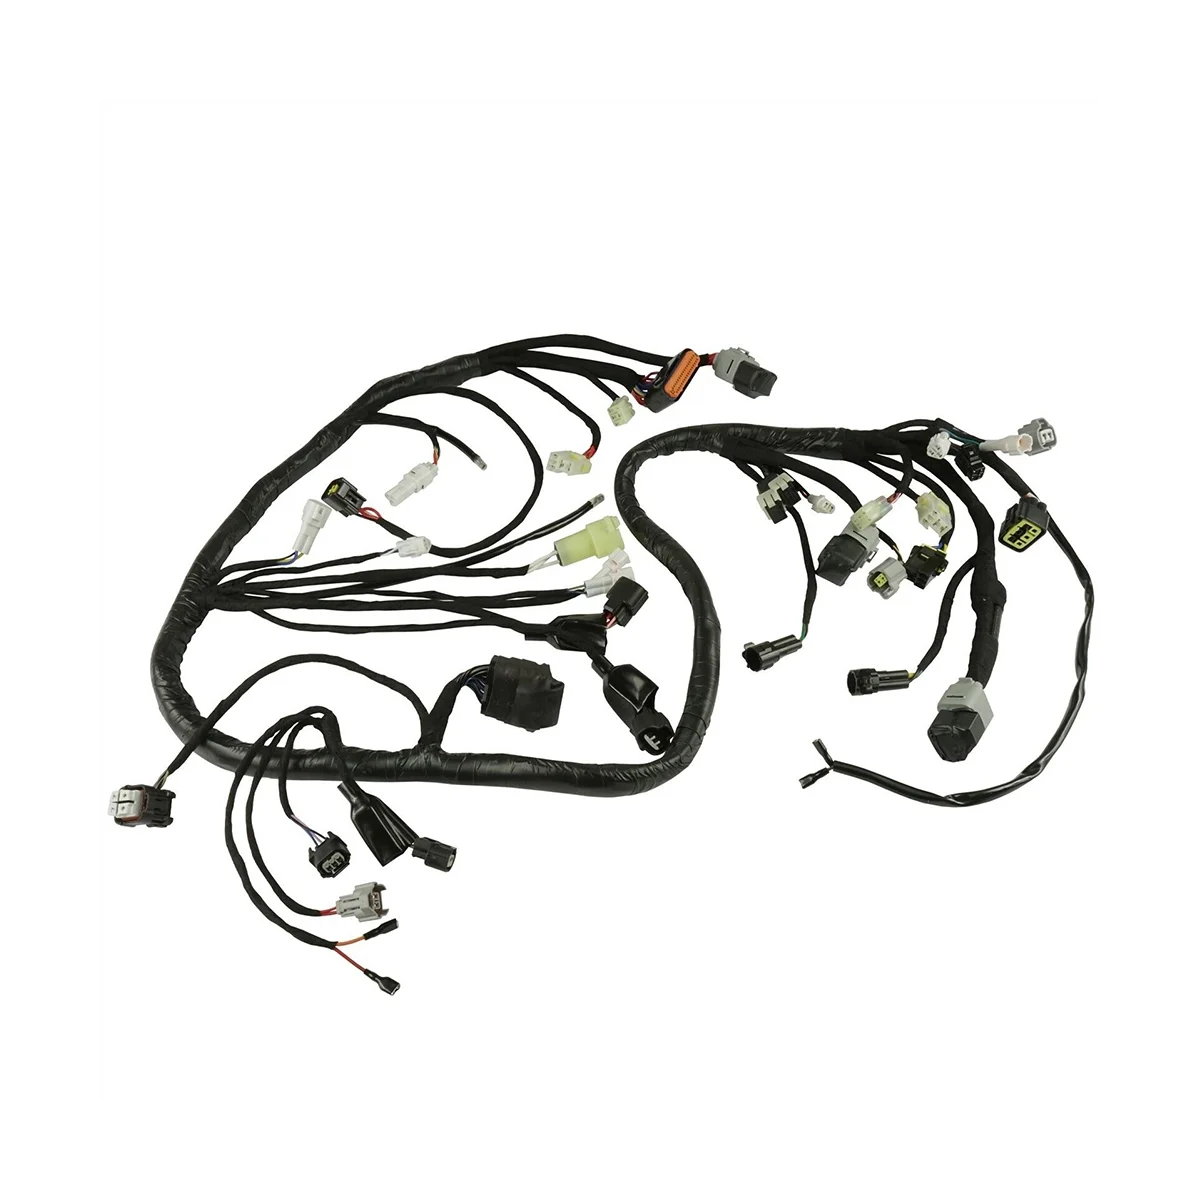 

New Wire Harness Assy for Yamaha YFZ450R 2009-2013 18P-82590-00